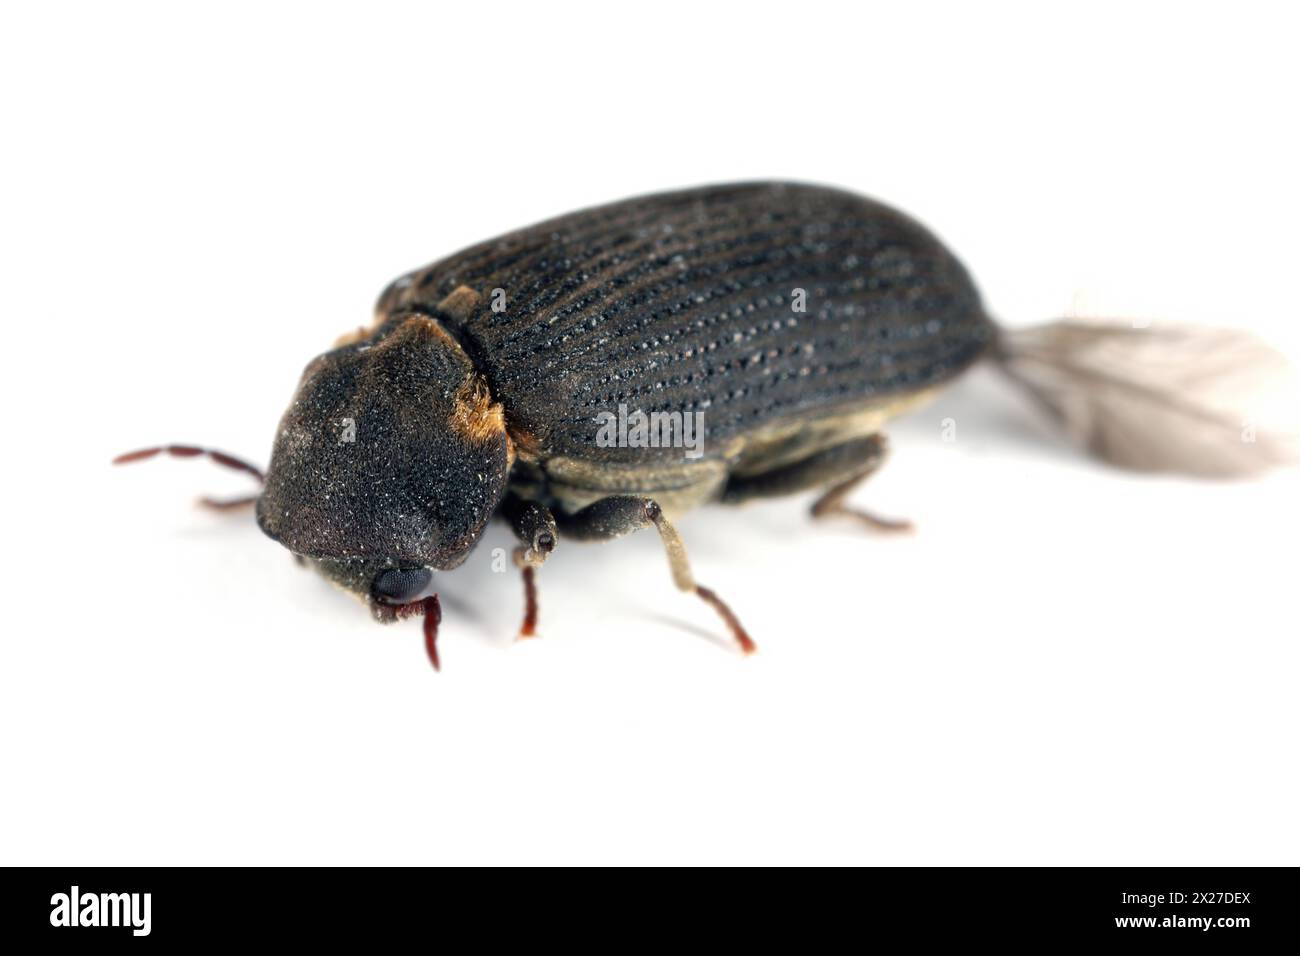 Woodboring beetle (Hadrobregmus pertinax), a common household pest.  isolated on a white background. Stock Photo